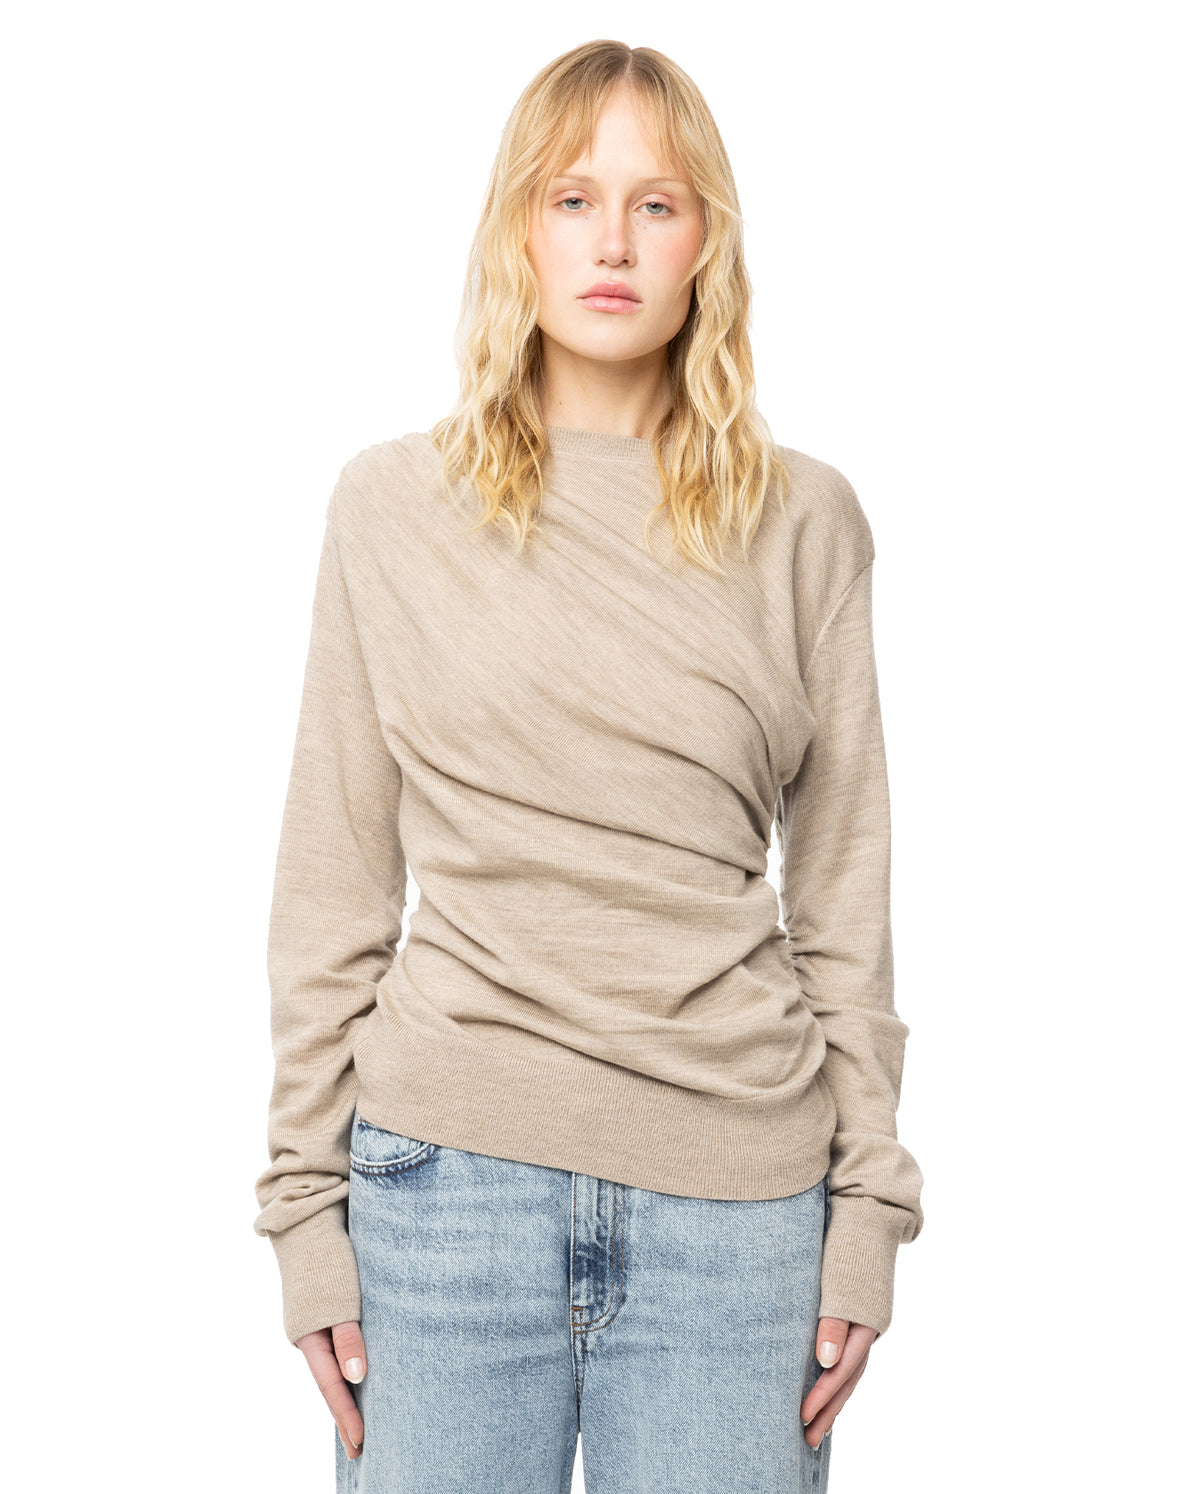 Eleornore Knitted Top  - Camel